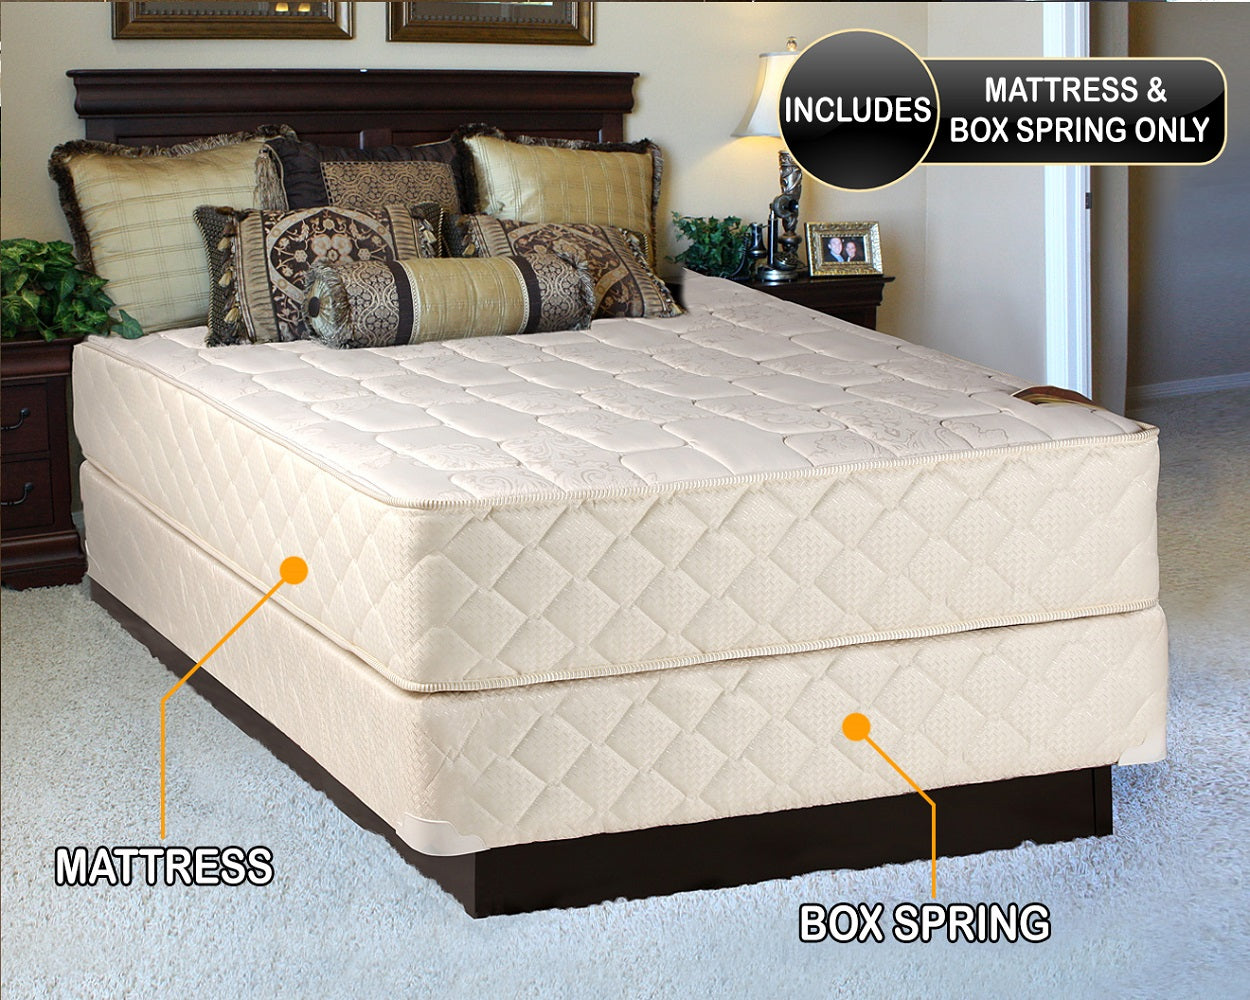 Grandeur Deluxe Twin XL 2-Sided Mattress and Box Spring Set